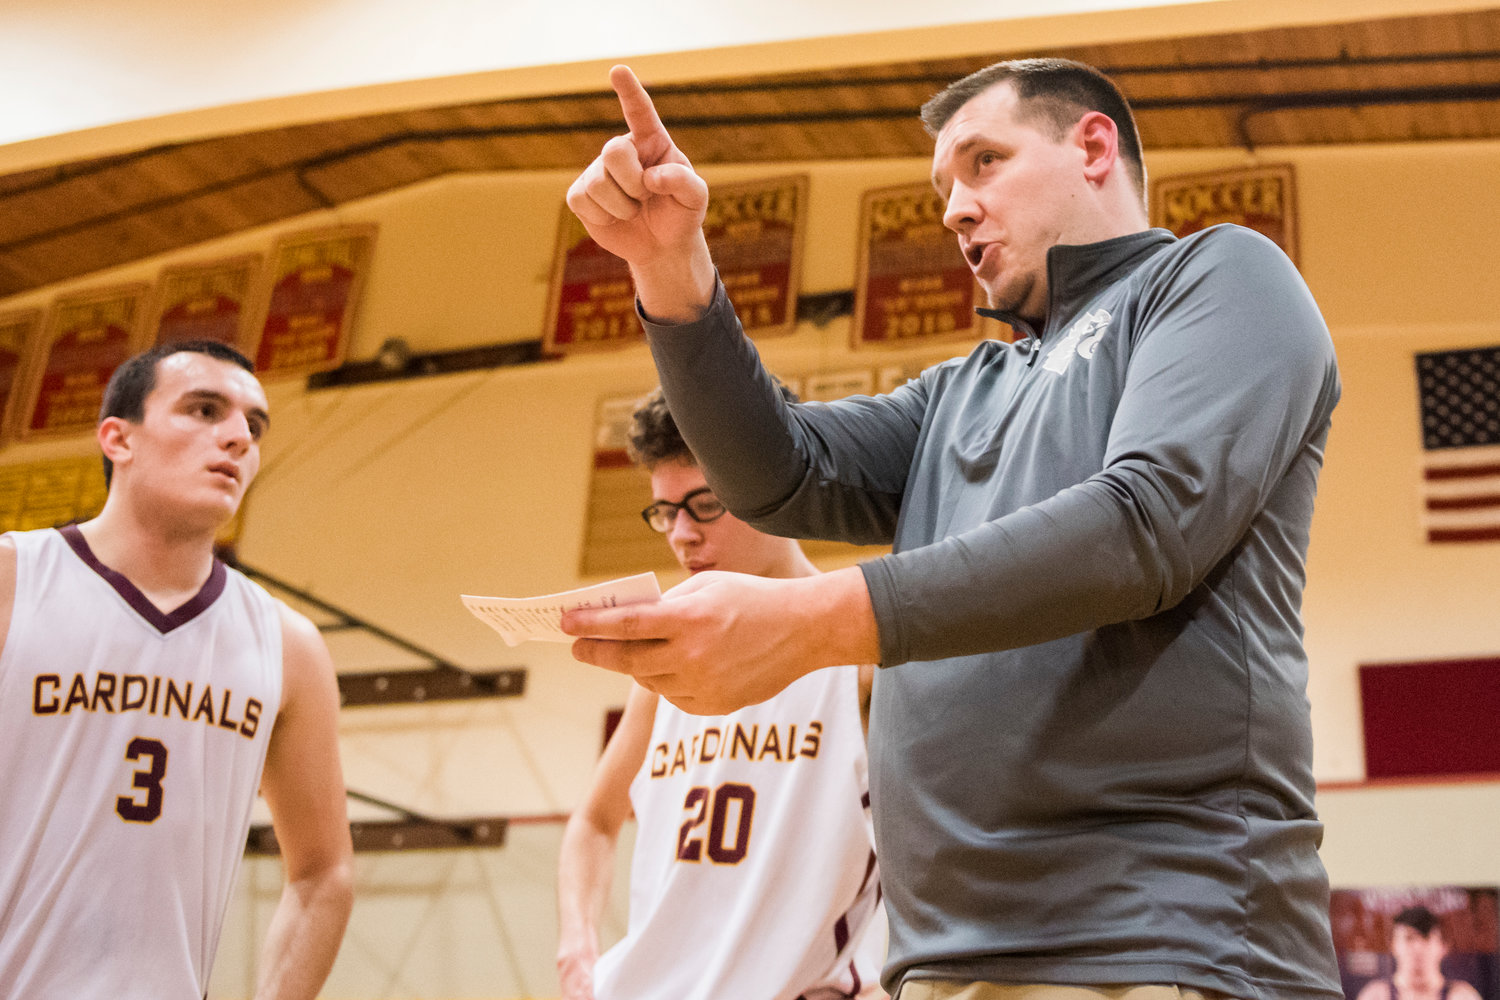 Winlock's coach Nick Bamer talks to players during a game against Hoquiam during the 2019-20 season. Bamer will take over as Tenino's athletic director in July.